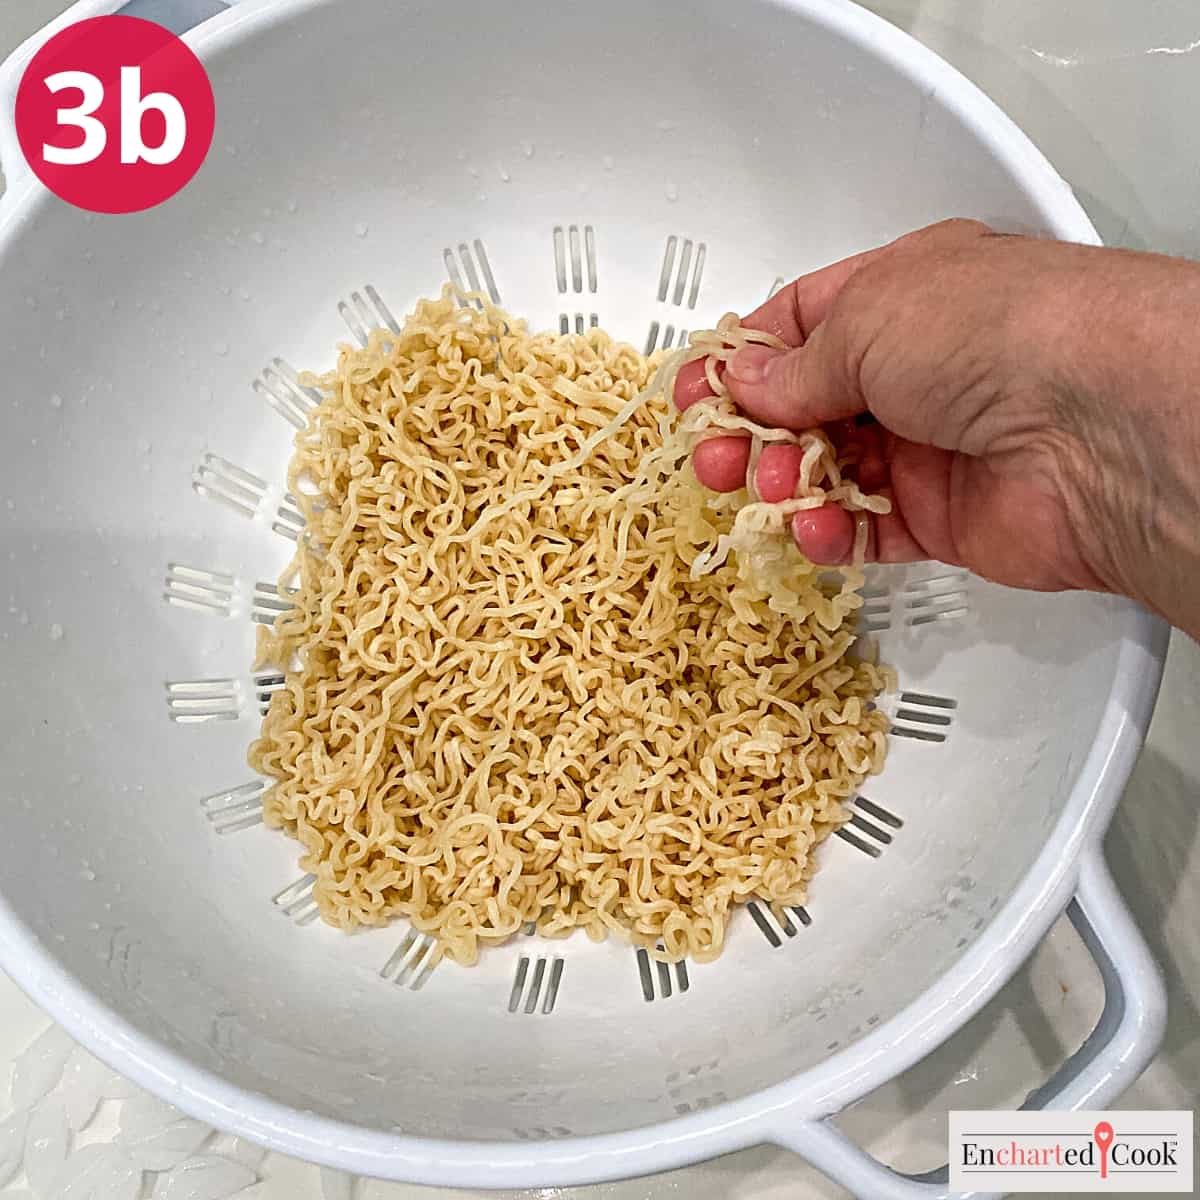 Process Photo 3b - Draining the cooled ramen noodles in a large colander.